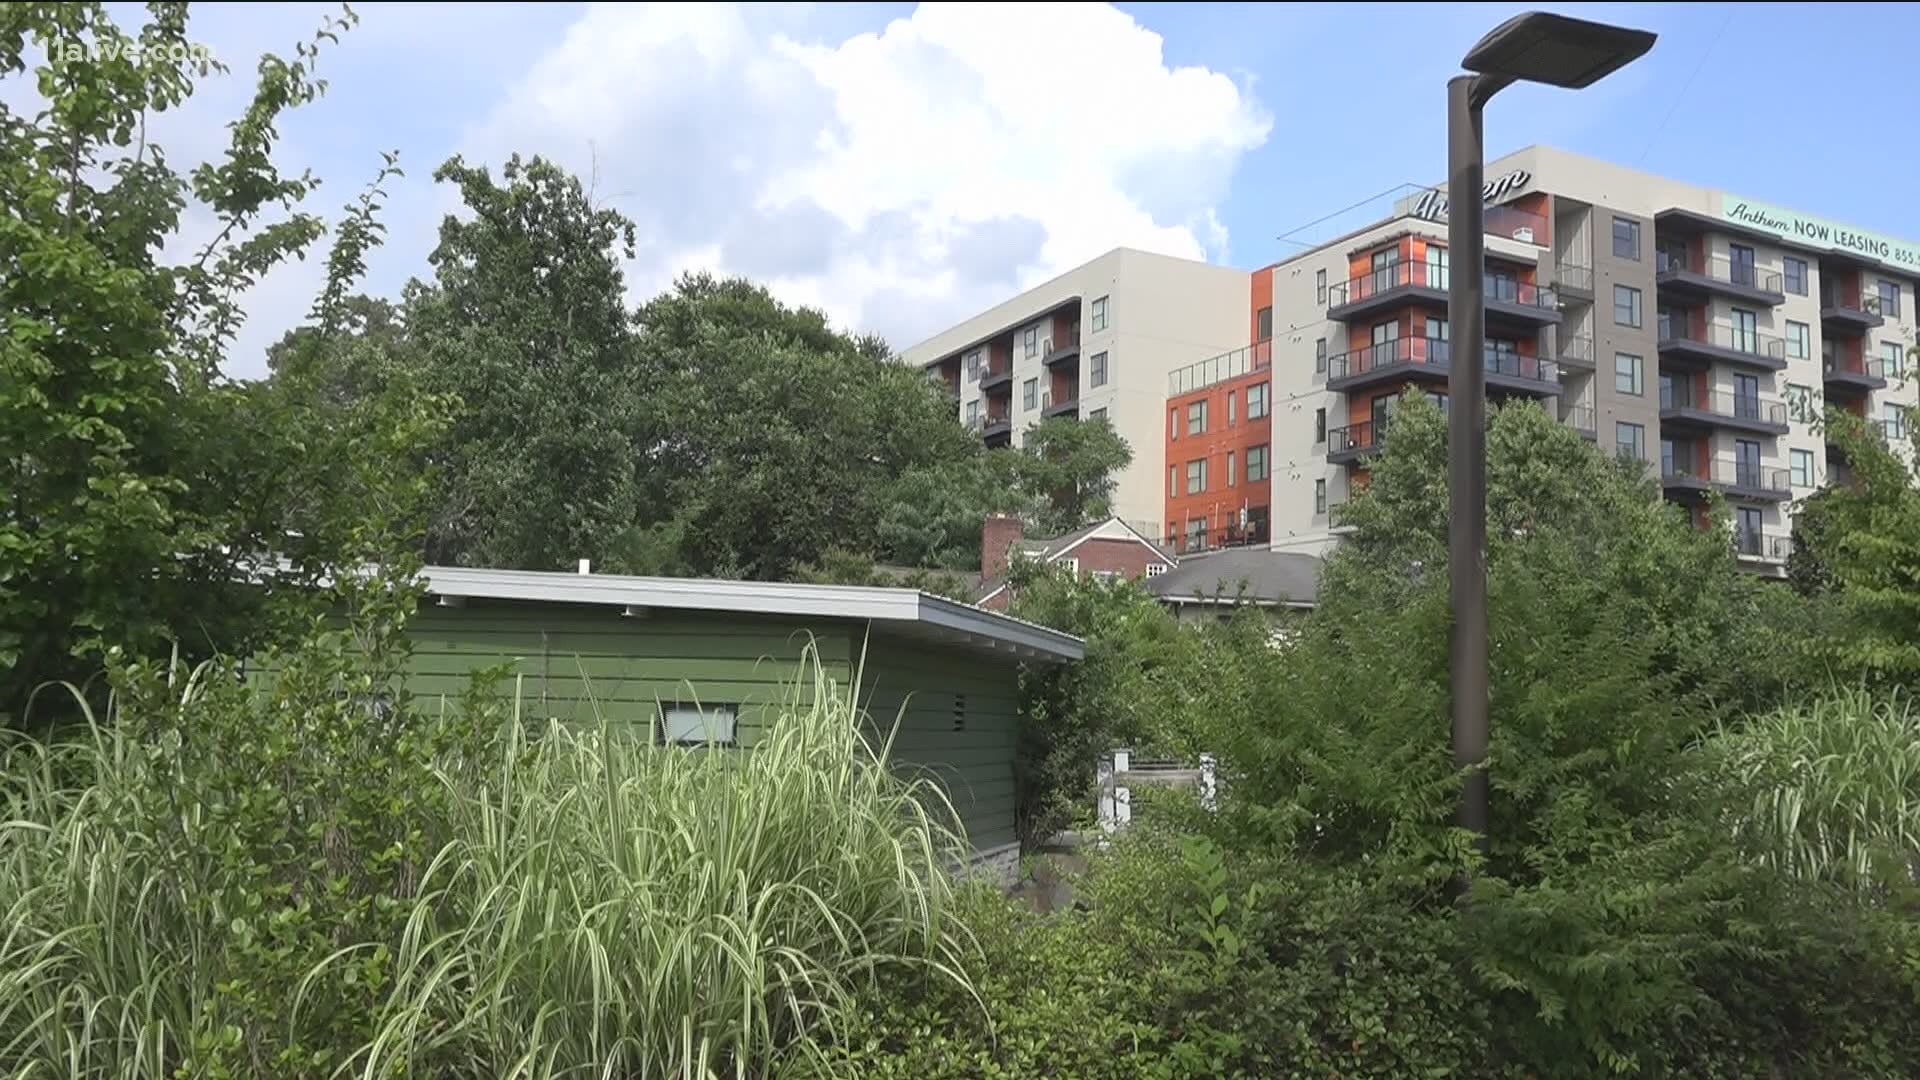 The Atlanta Neighborhood Development Partnership plans to develop and preserve 2,000 units as affordable living spaces, according to the Atlanta Business Chronicle.